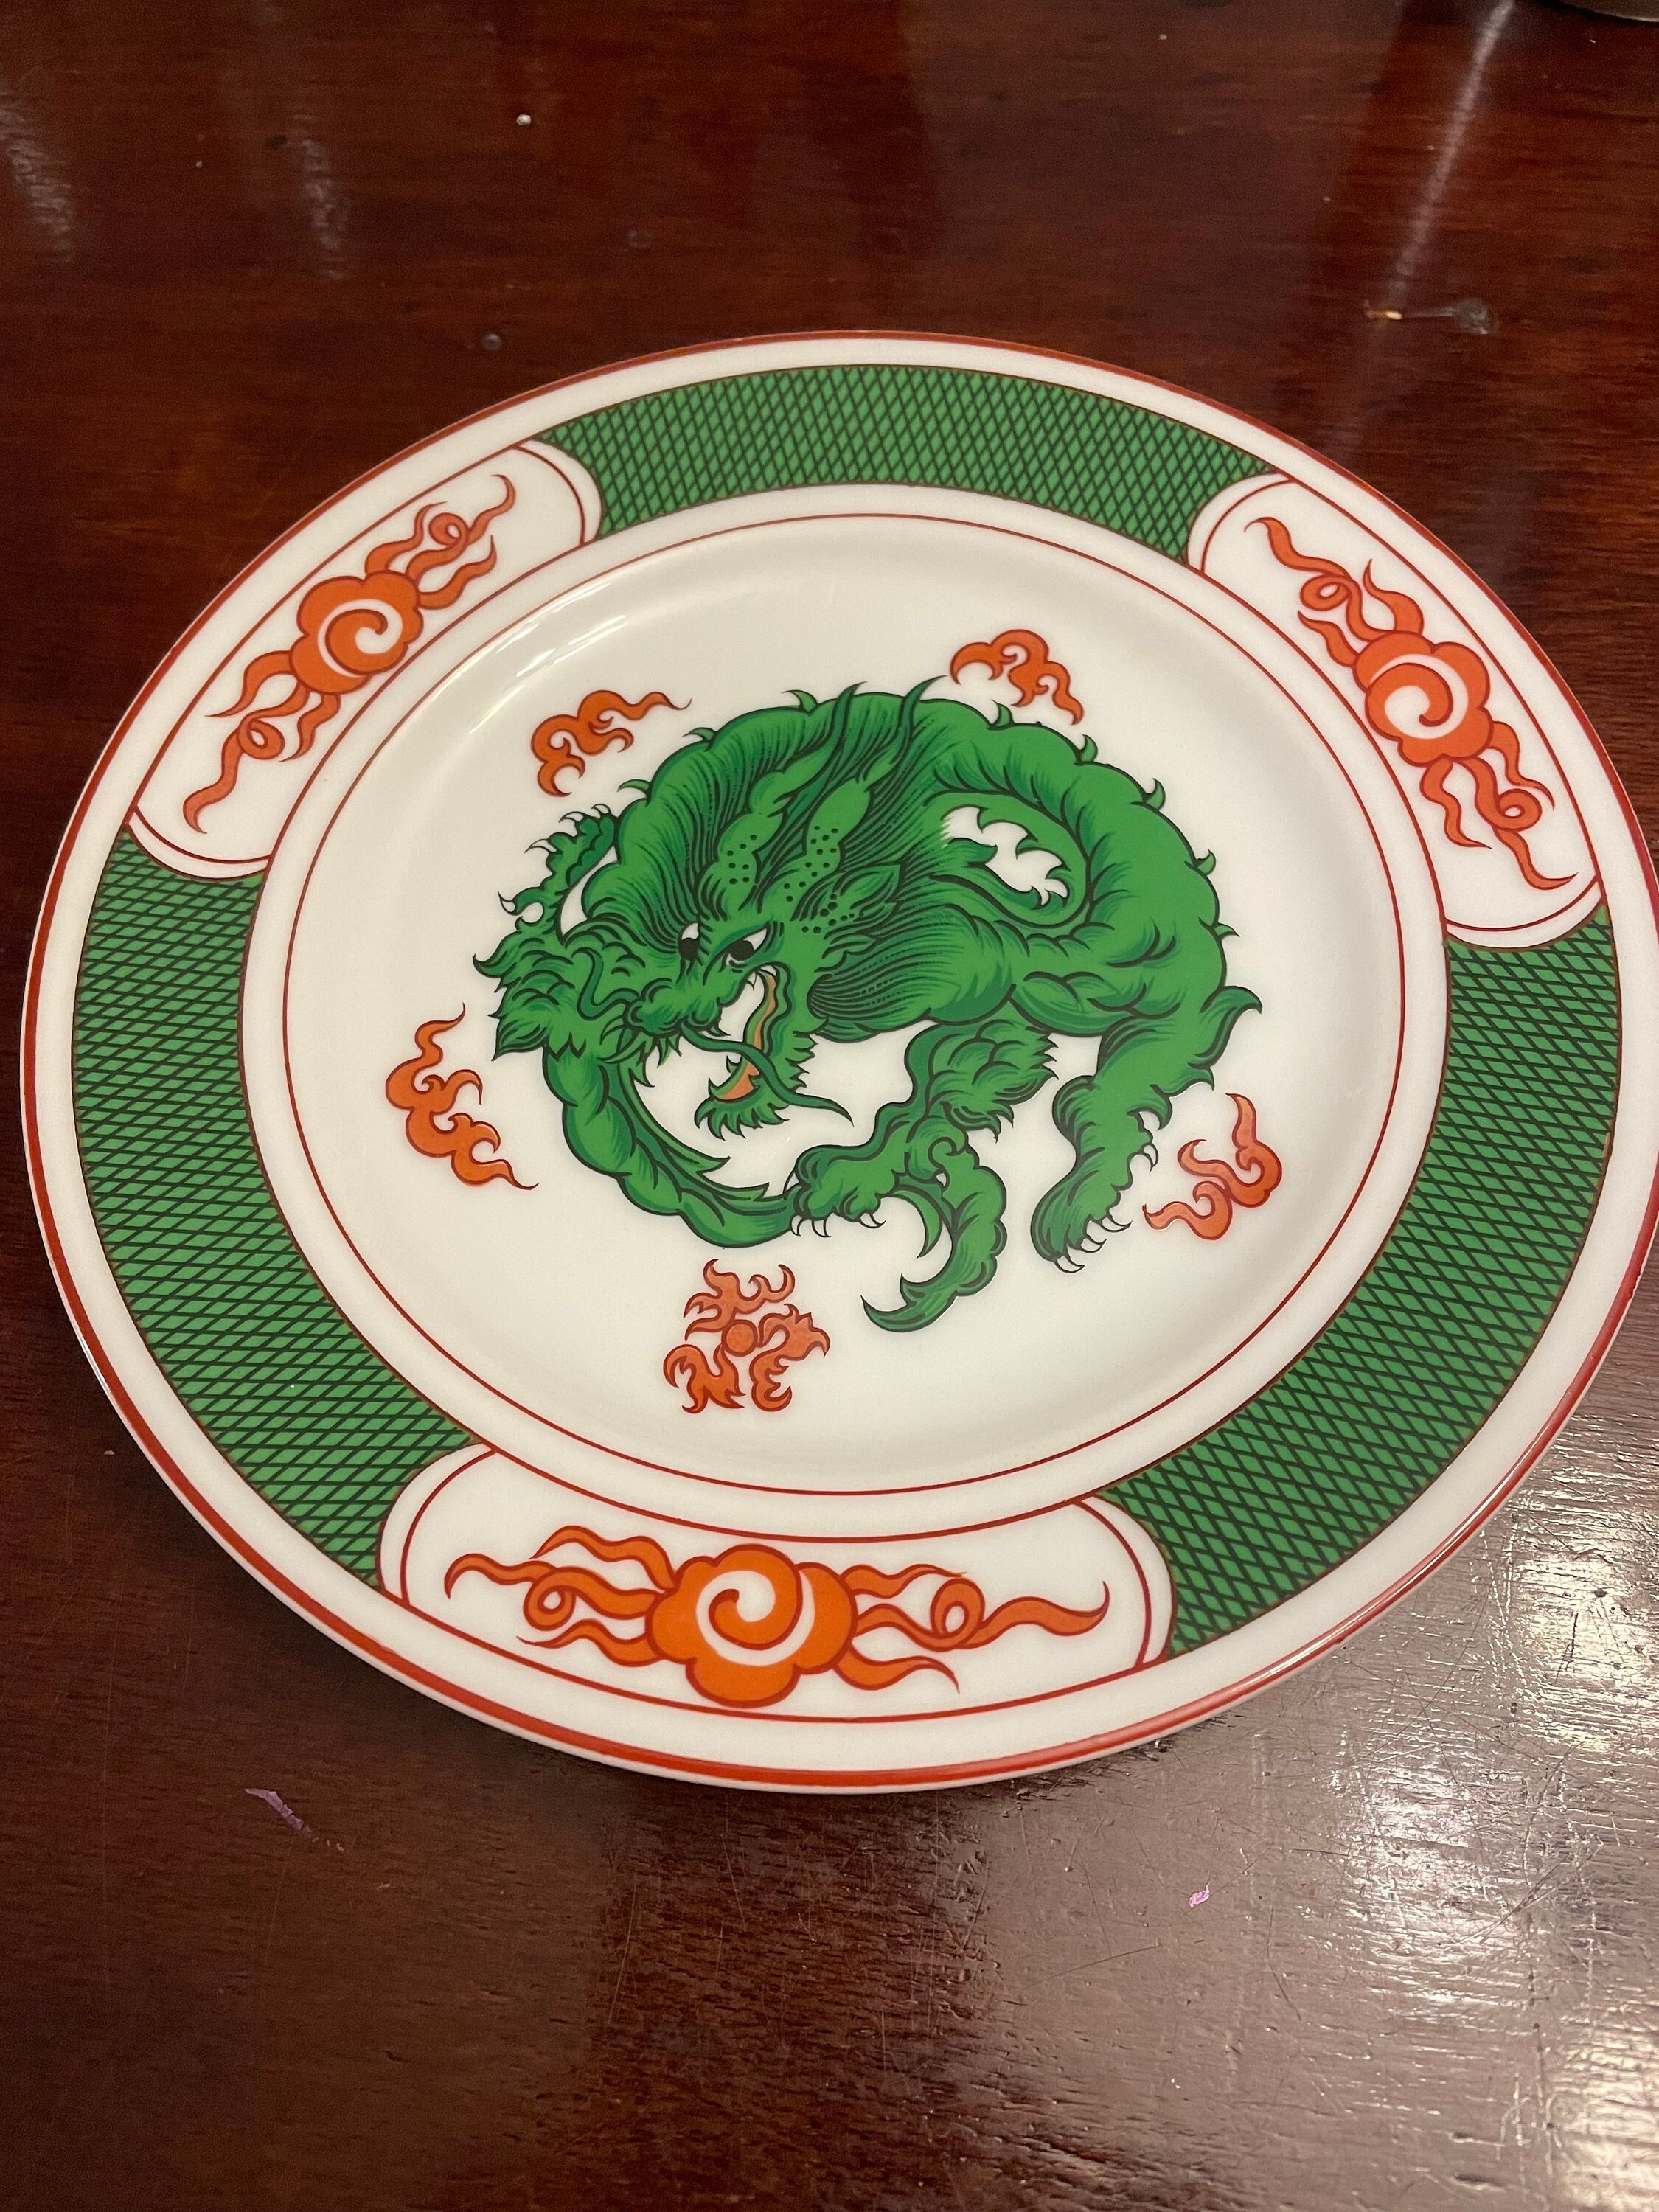 Fitz and Floyd - Dragon Crest Salad Plates (Two) - Green - 1970's  Discontinued